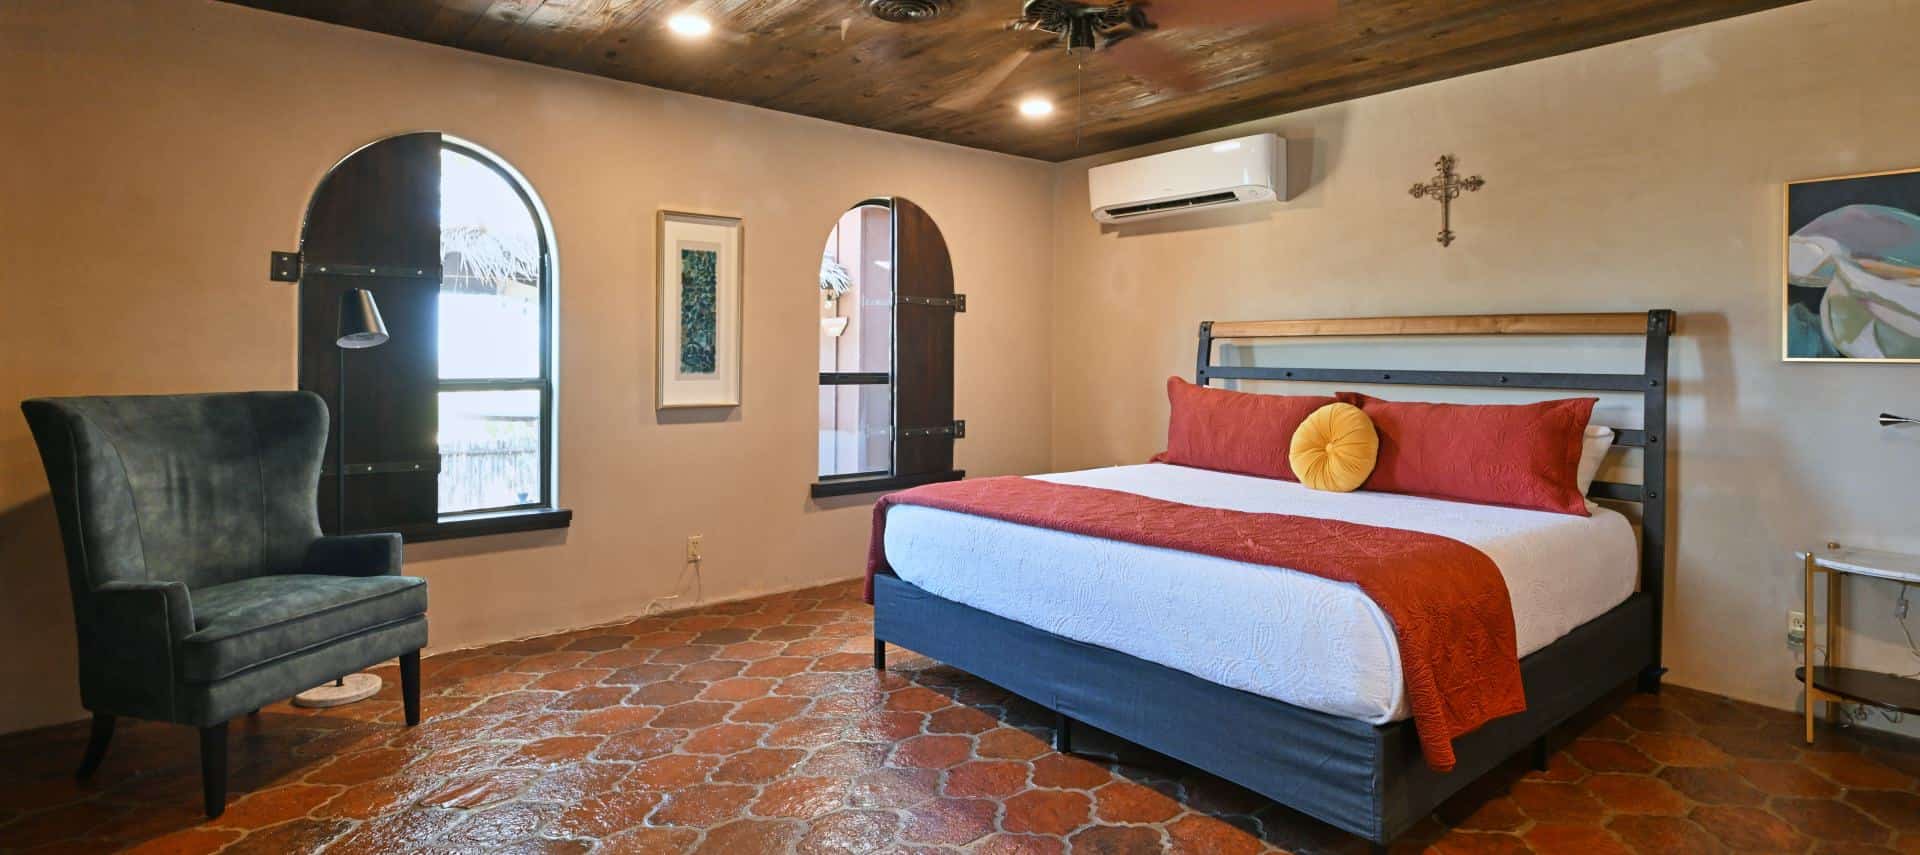 Bedroom with light colored walls, terracotta tile flooring, bed with white bedding, red pillows and blanket, and blue upholstered armchair